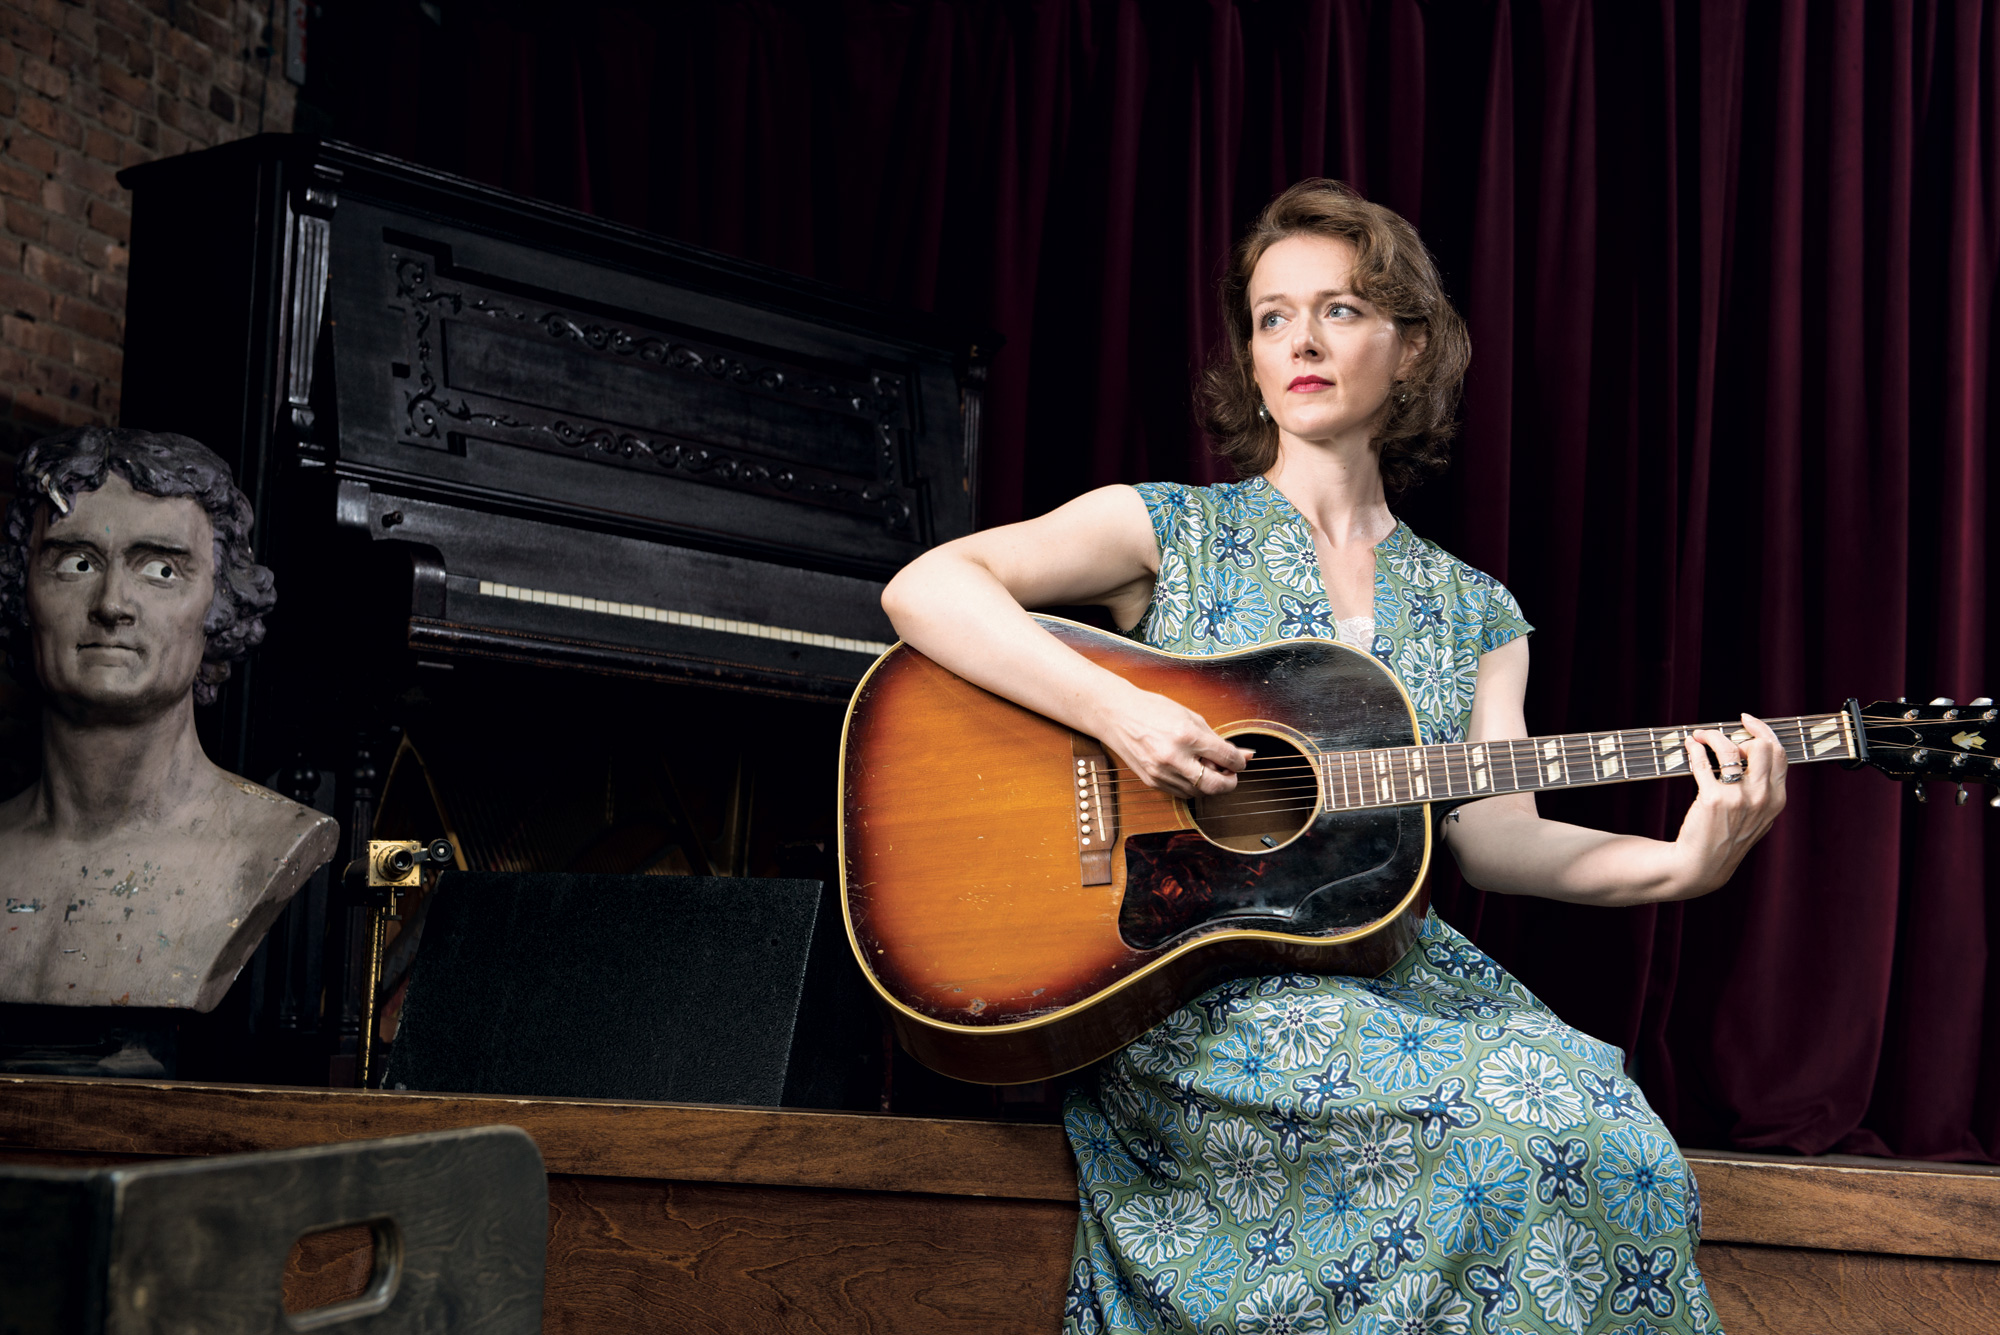 Laura Cantrell with guitar, photographed by Rayon Richards